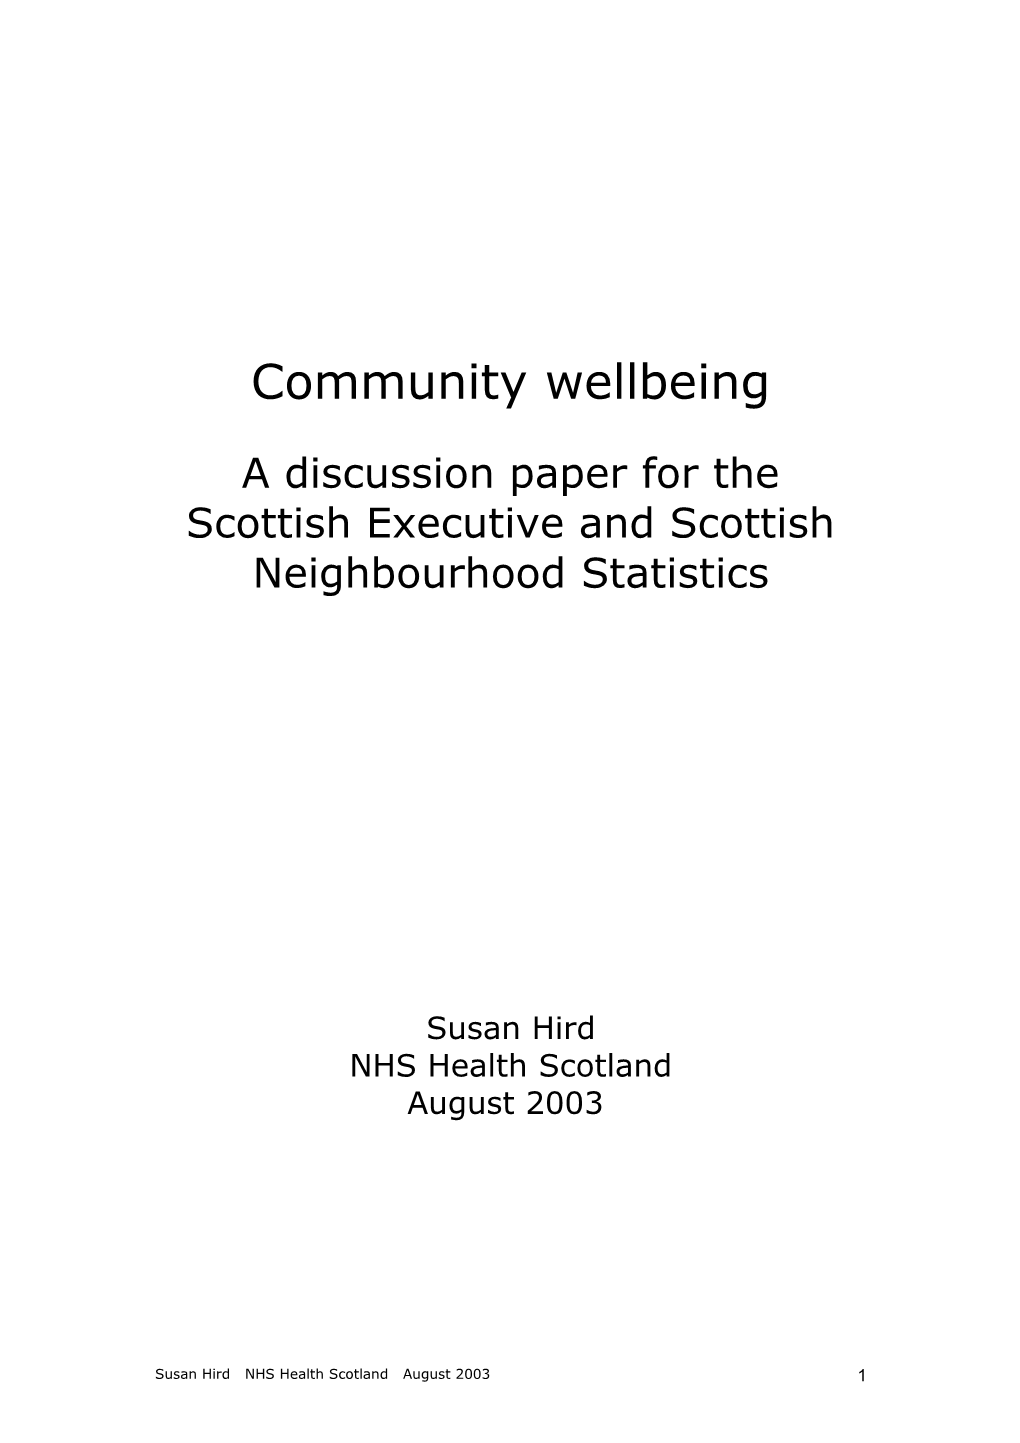 A Discussion Paper for the Scottish Executive and Scottish Neighbourhood Statistics